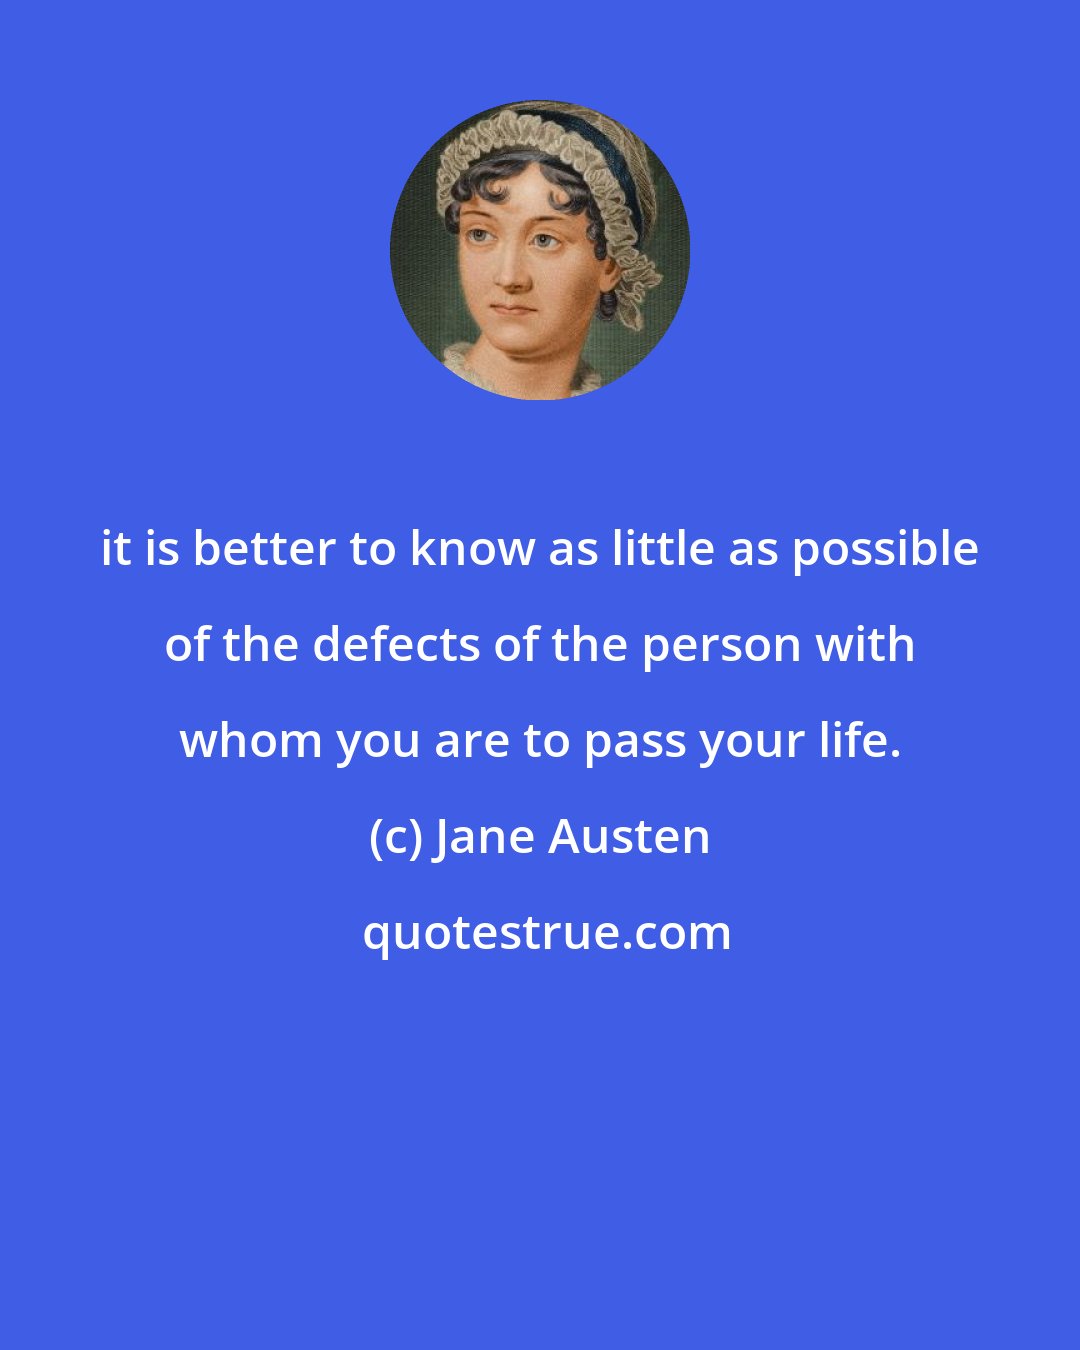 Jane Austen: it is better to know as little as possible of the defects of the person with whom you are to pass your life.